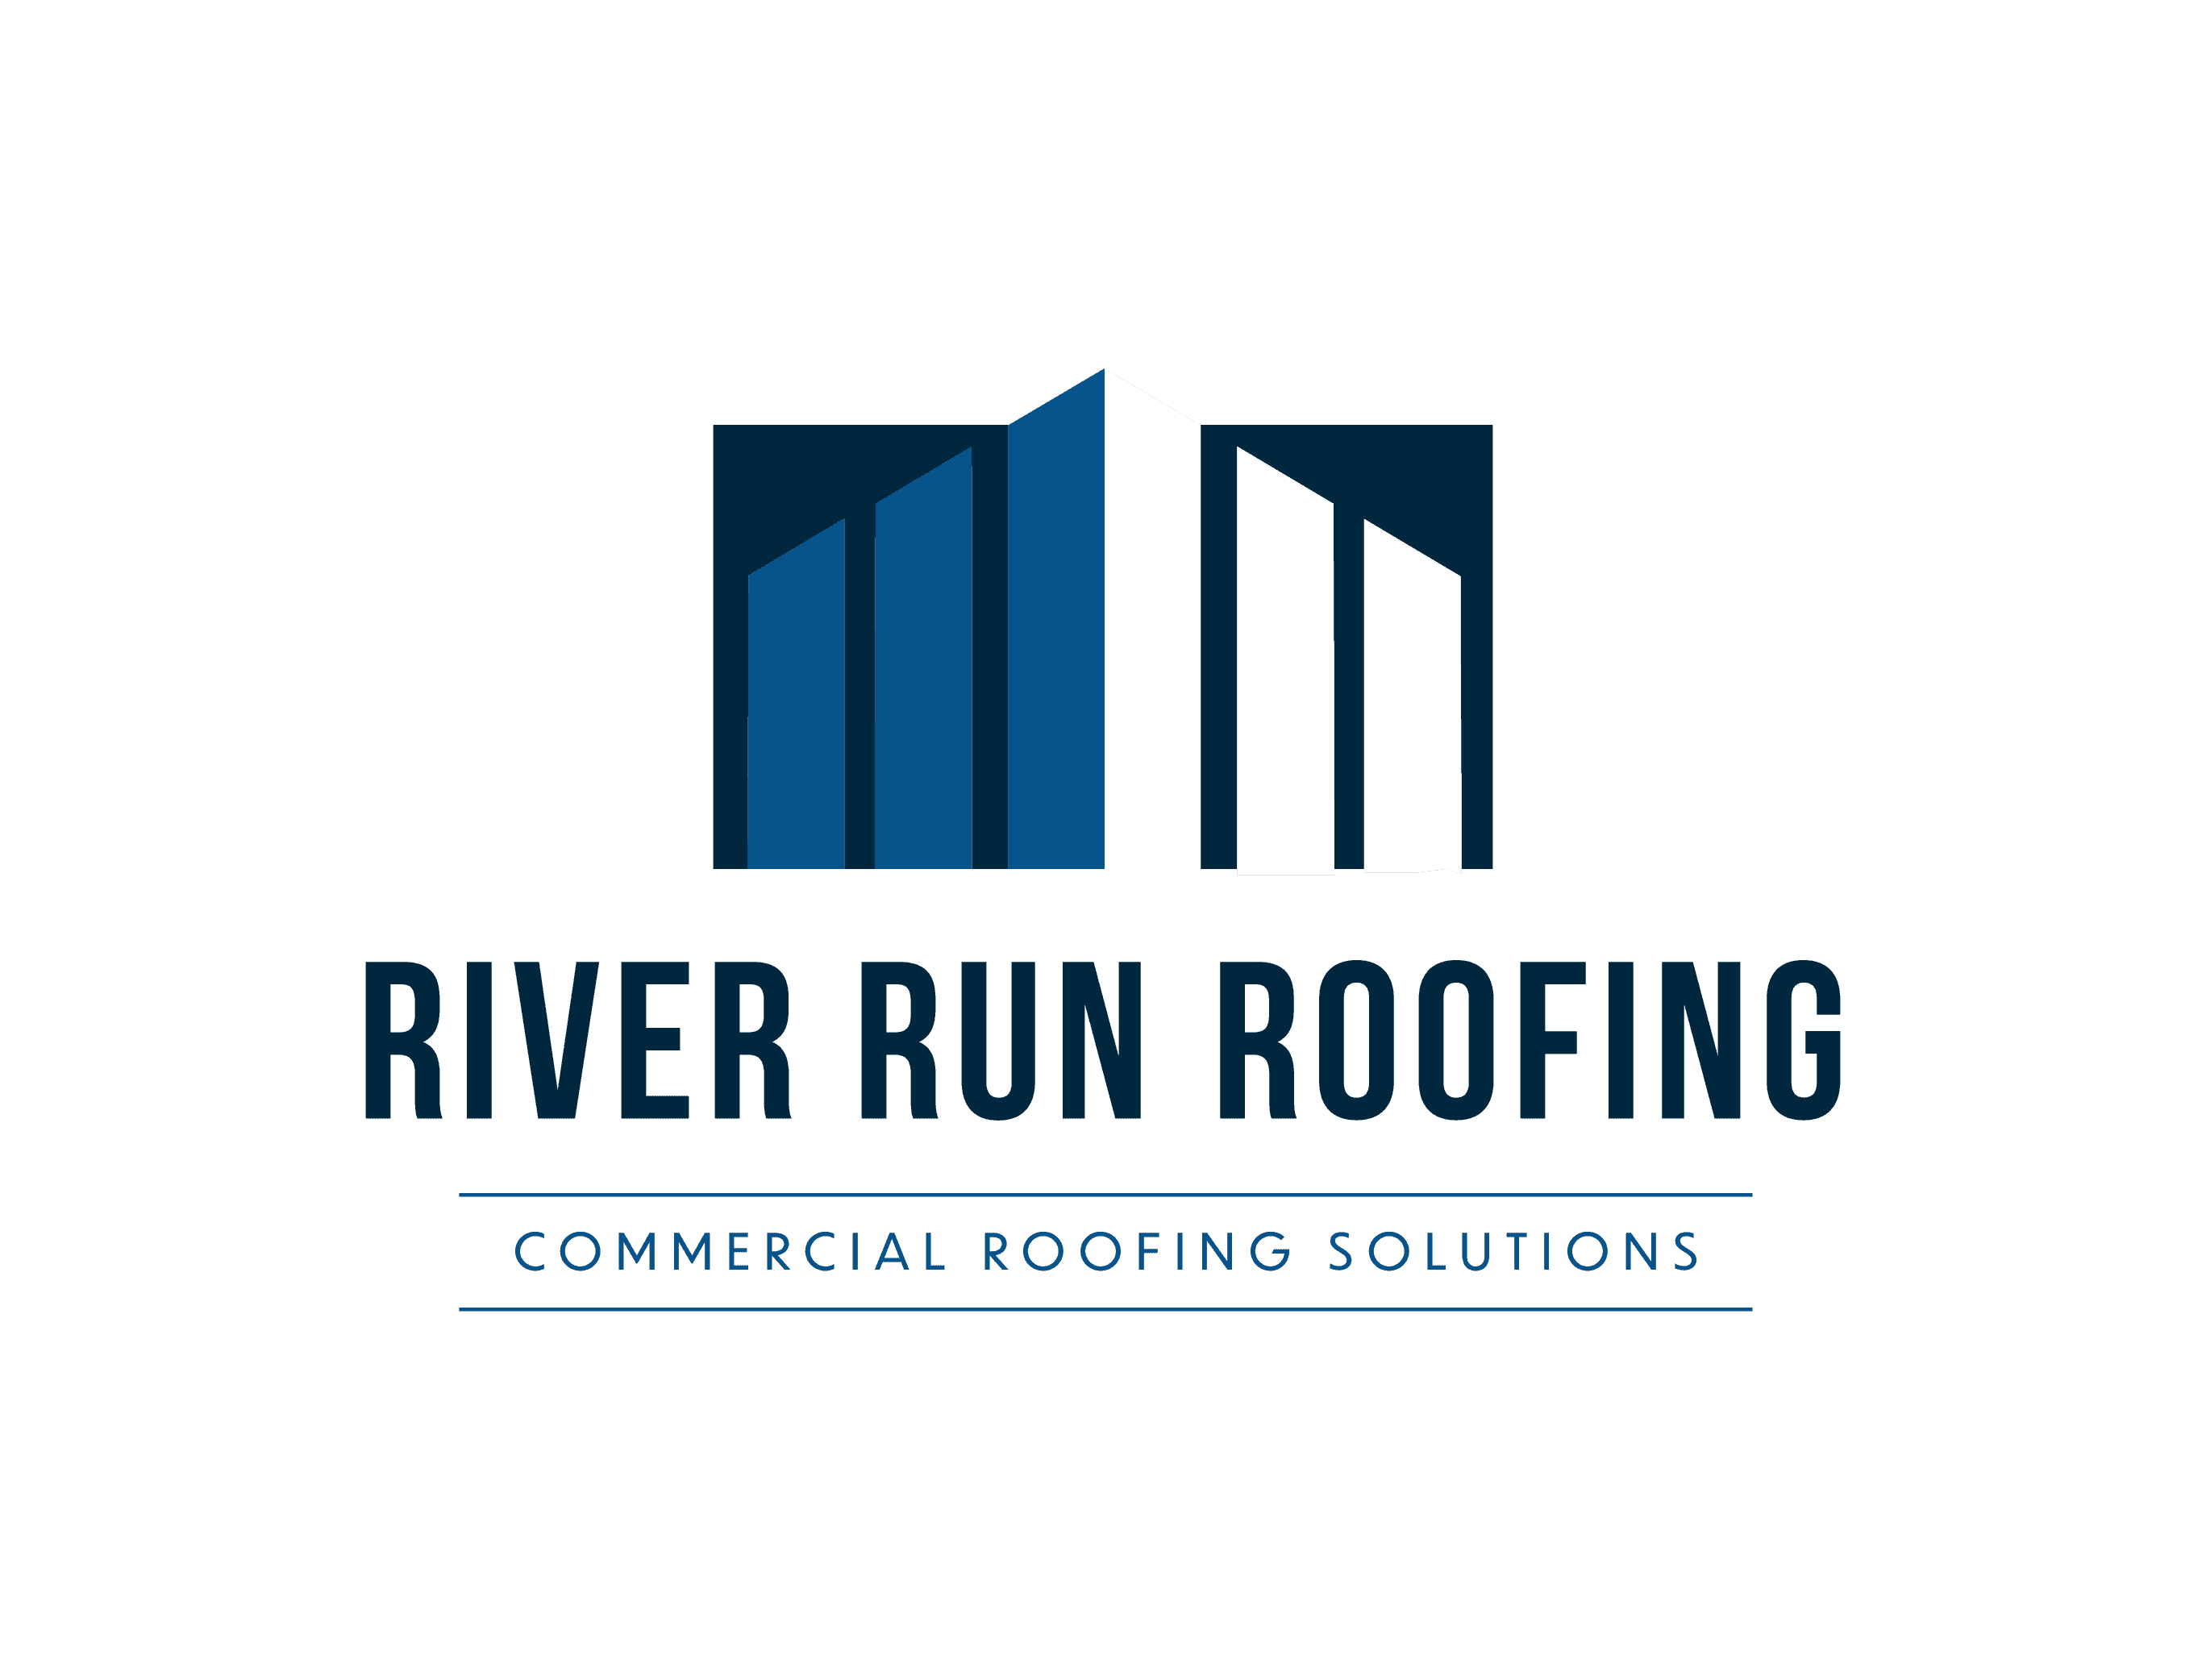 River Run Roofing's logo